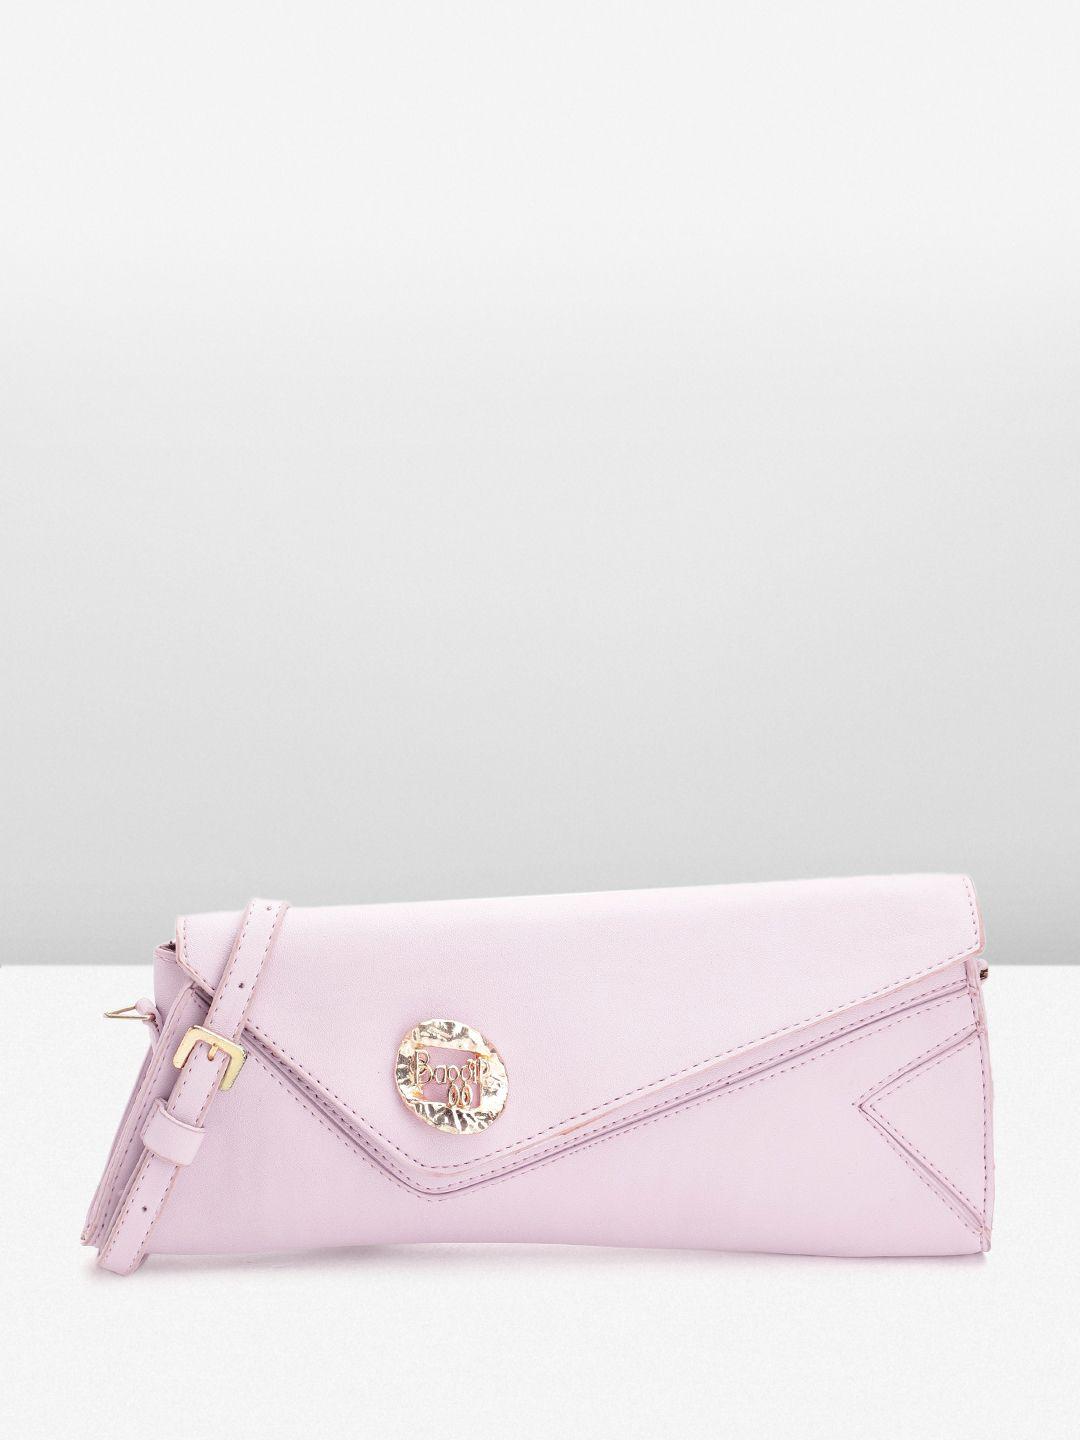 baggit envelope clutch with sling strap